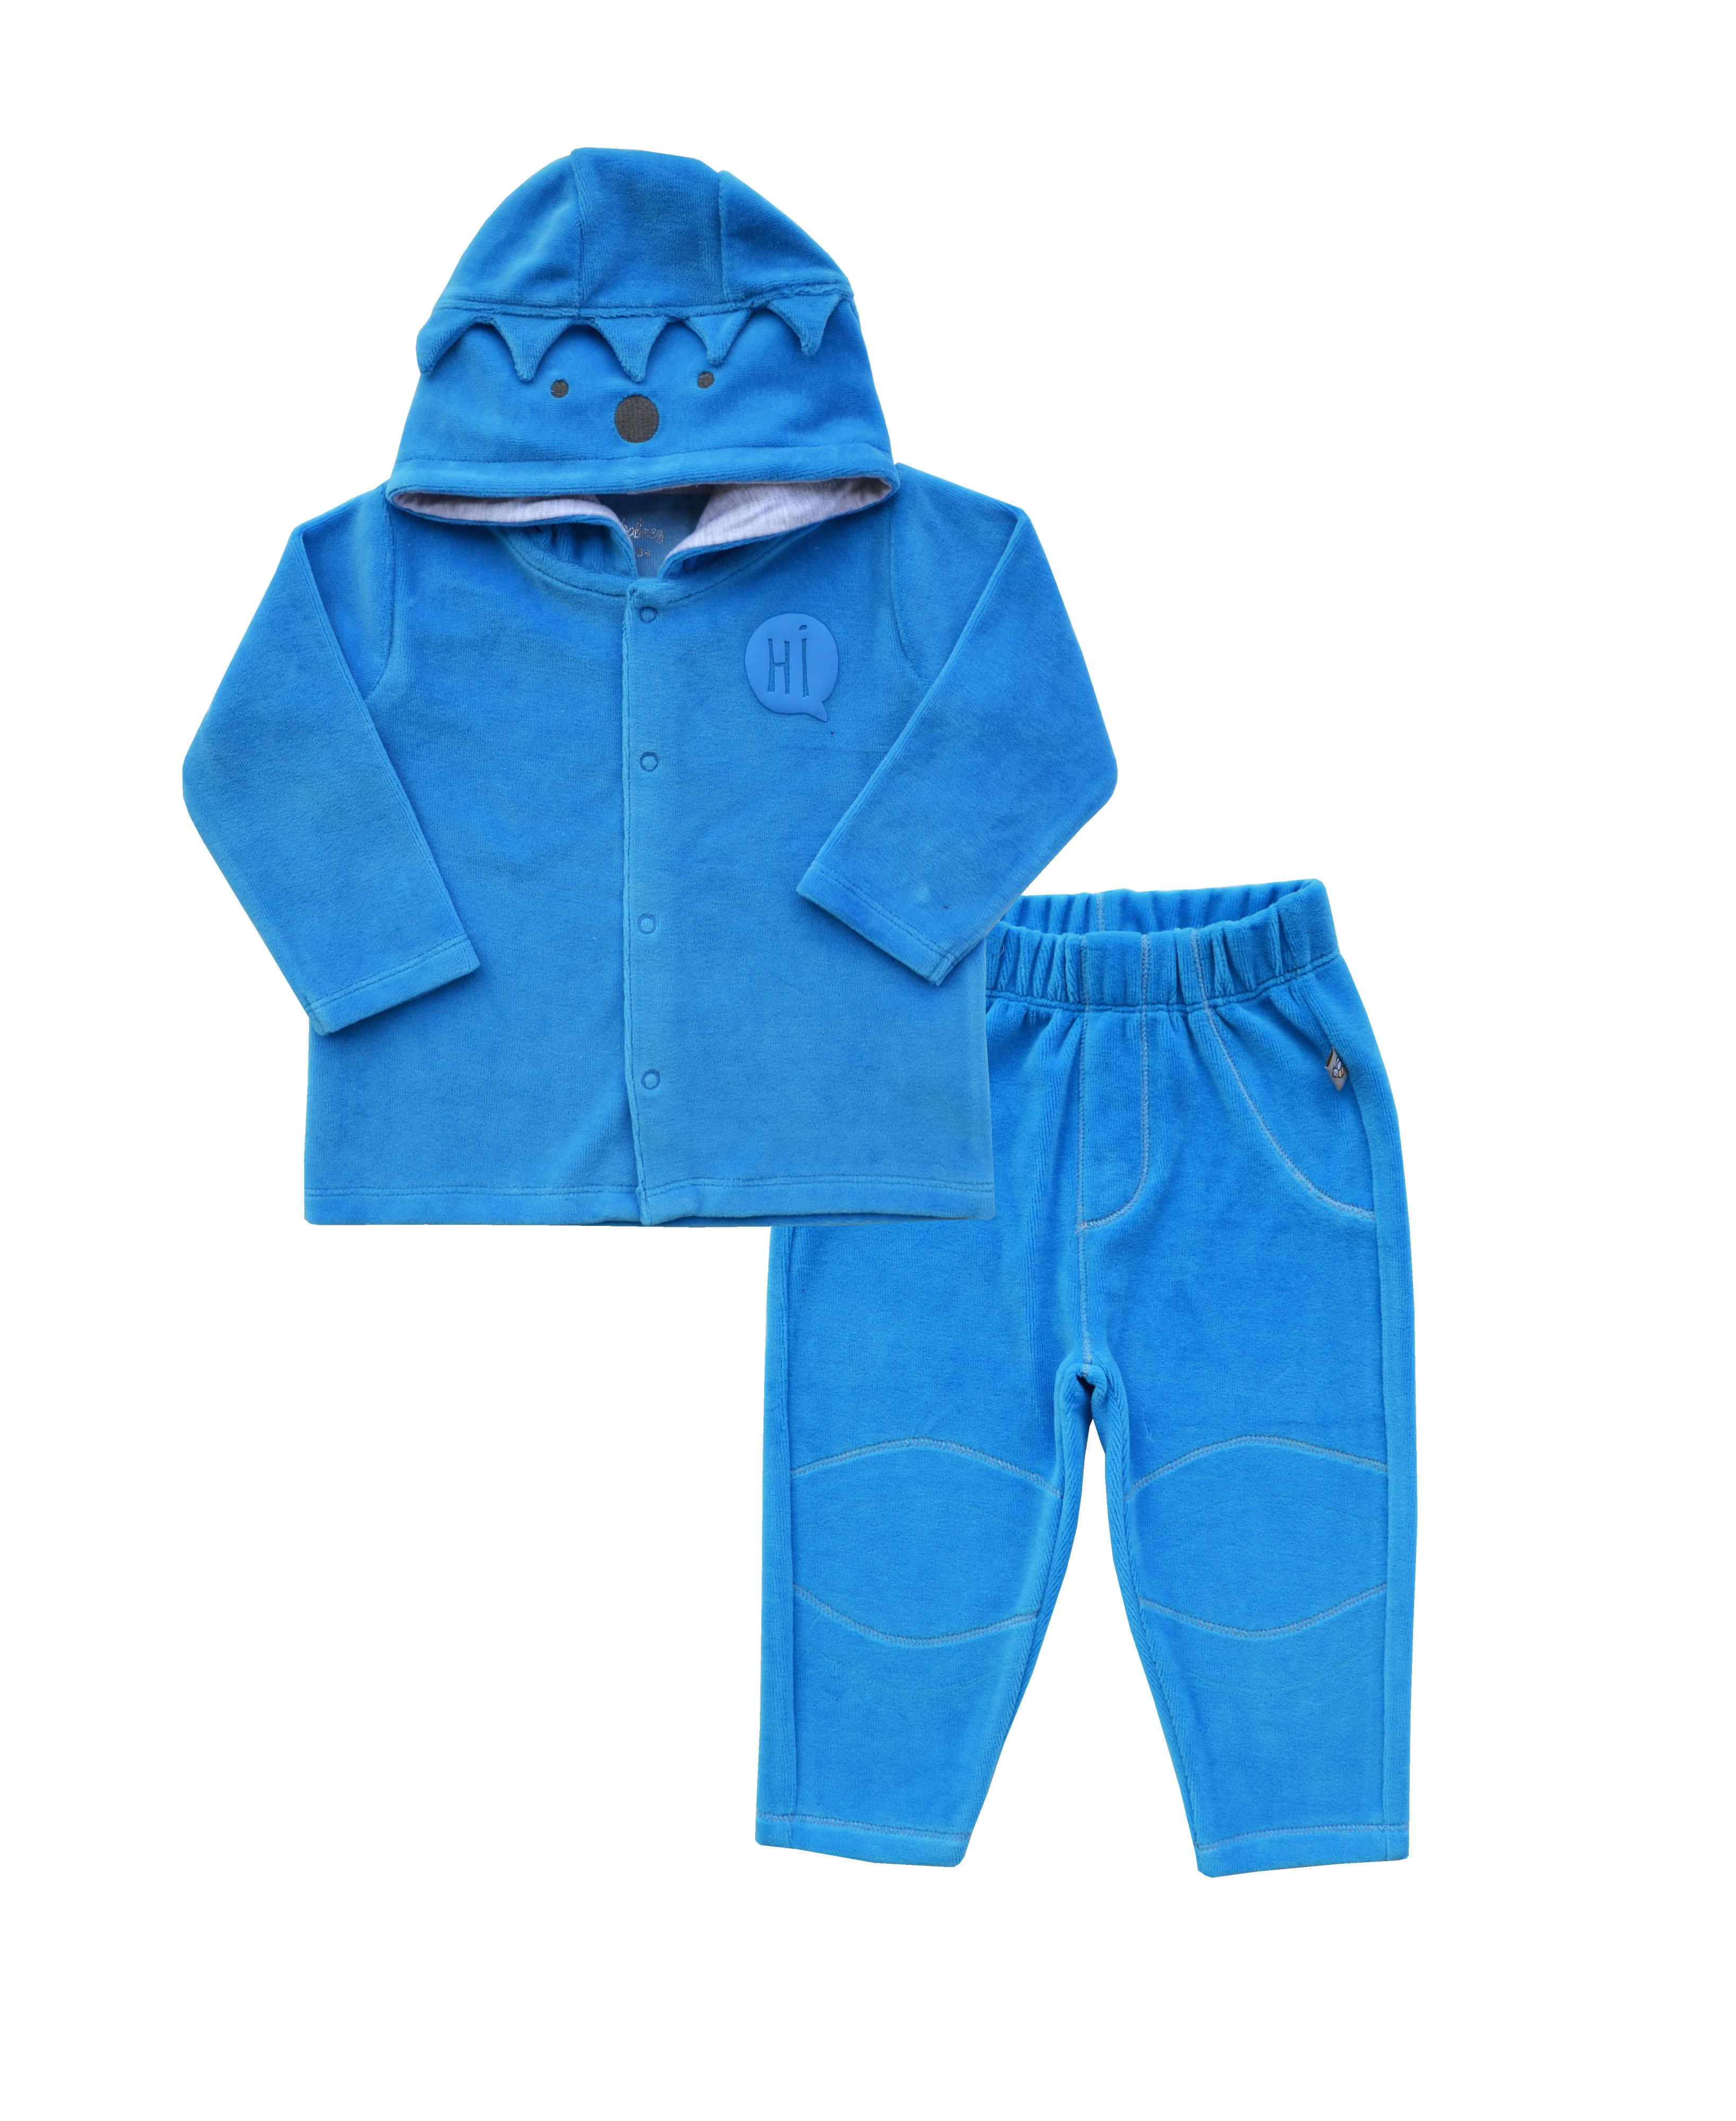 Blue Long Sleeves Hoody Jacket and Blue Pant(Velour)